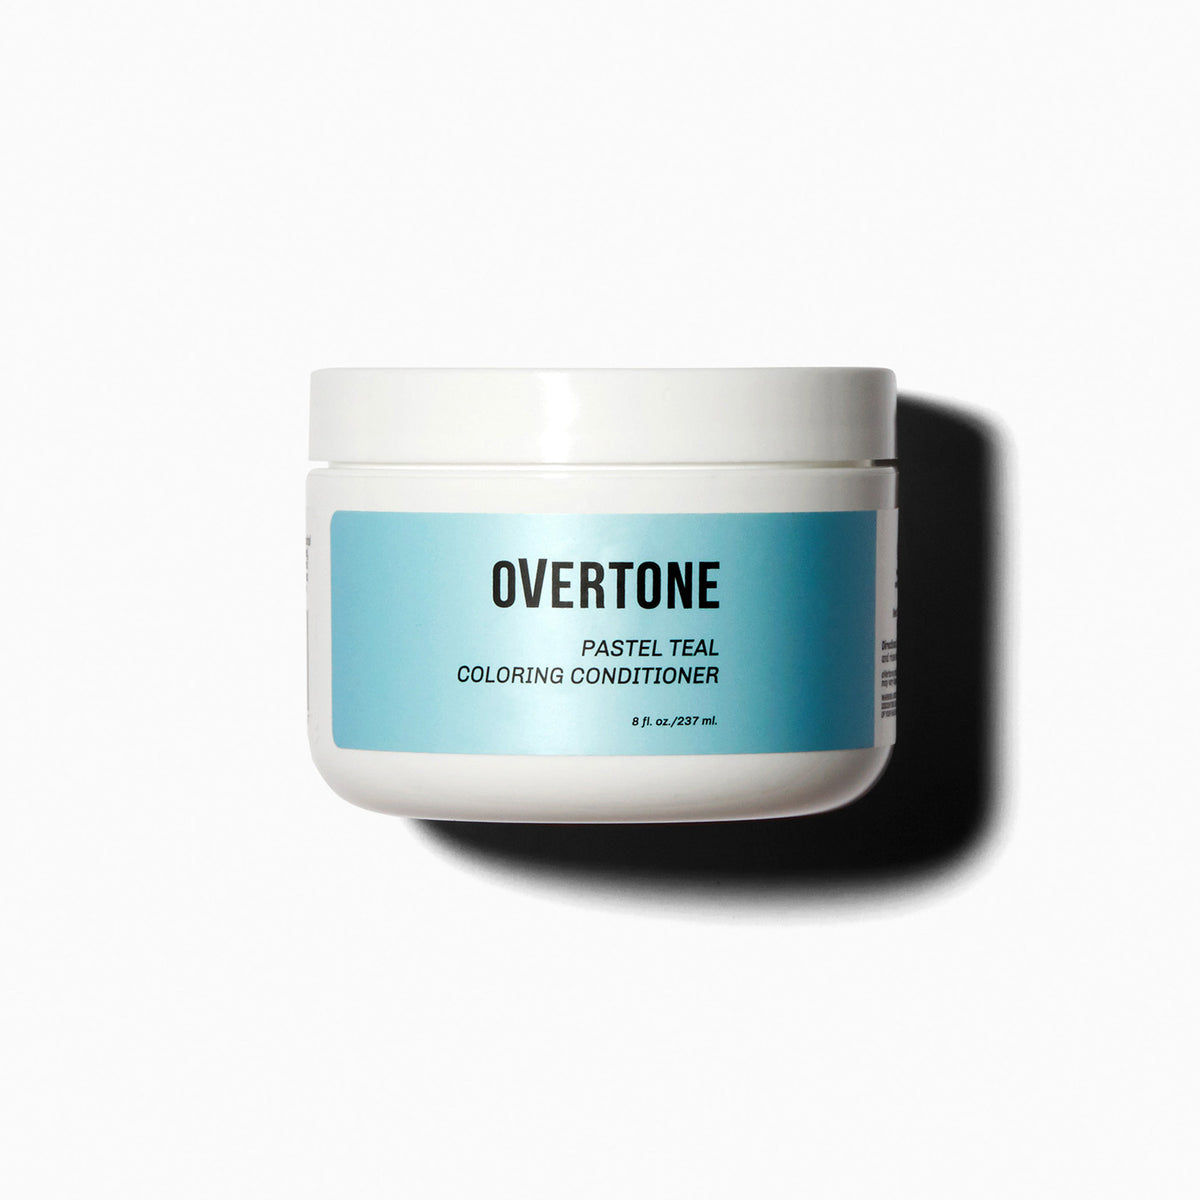 oVertone Pastel Teal Coloring Conditioner